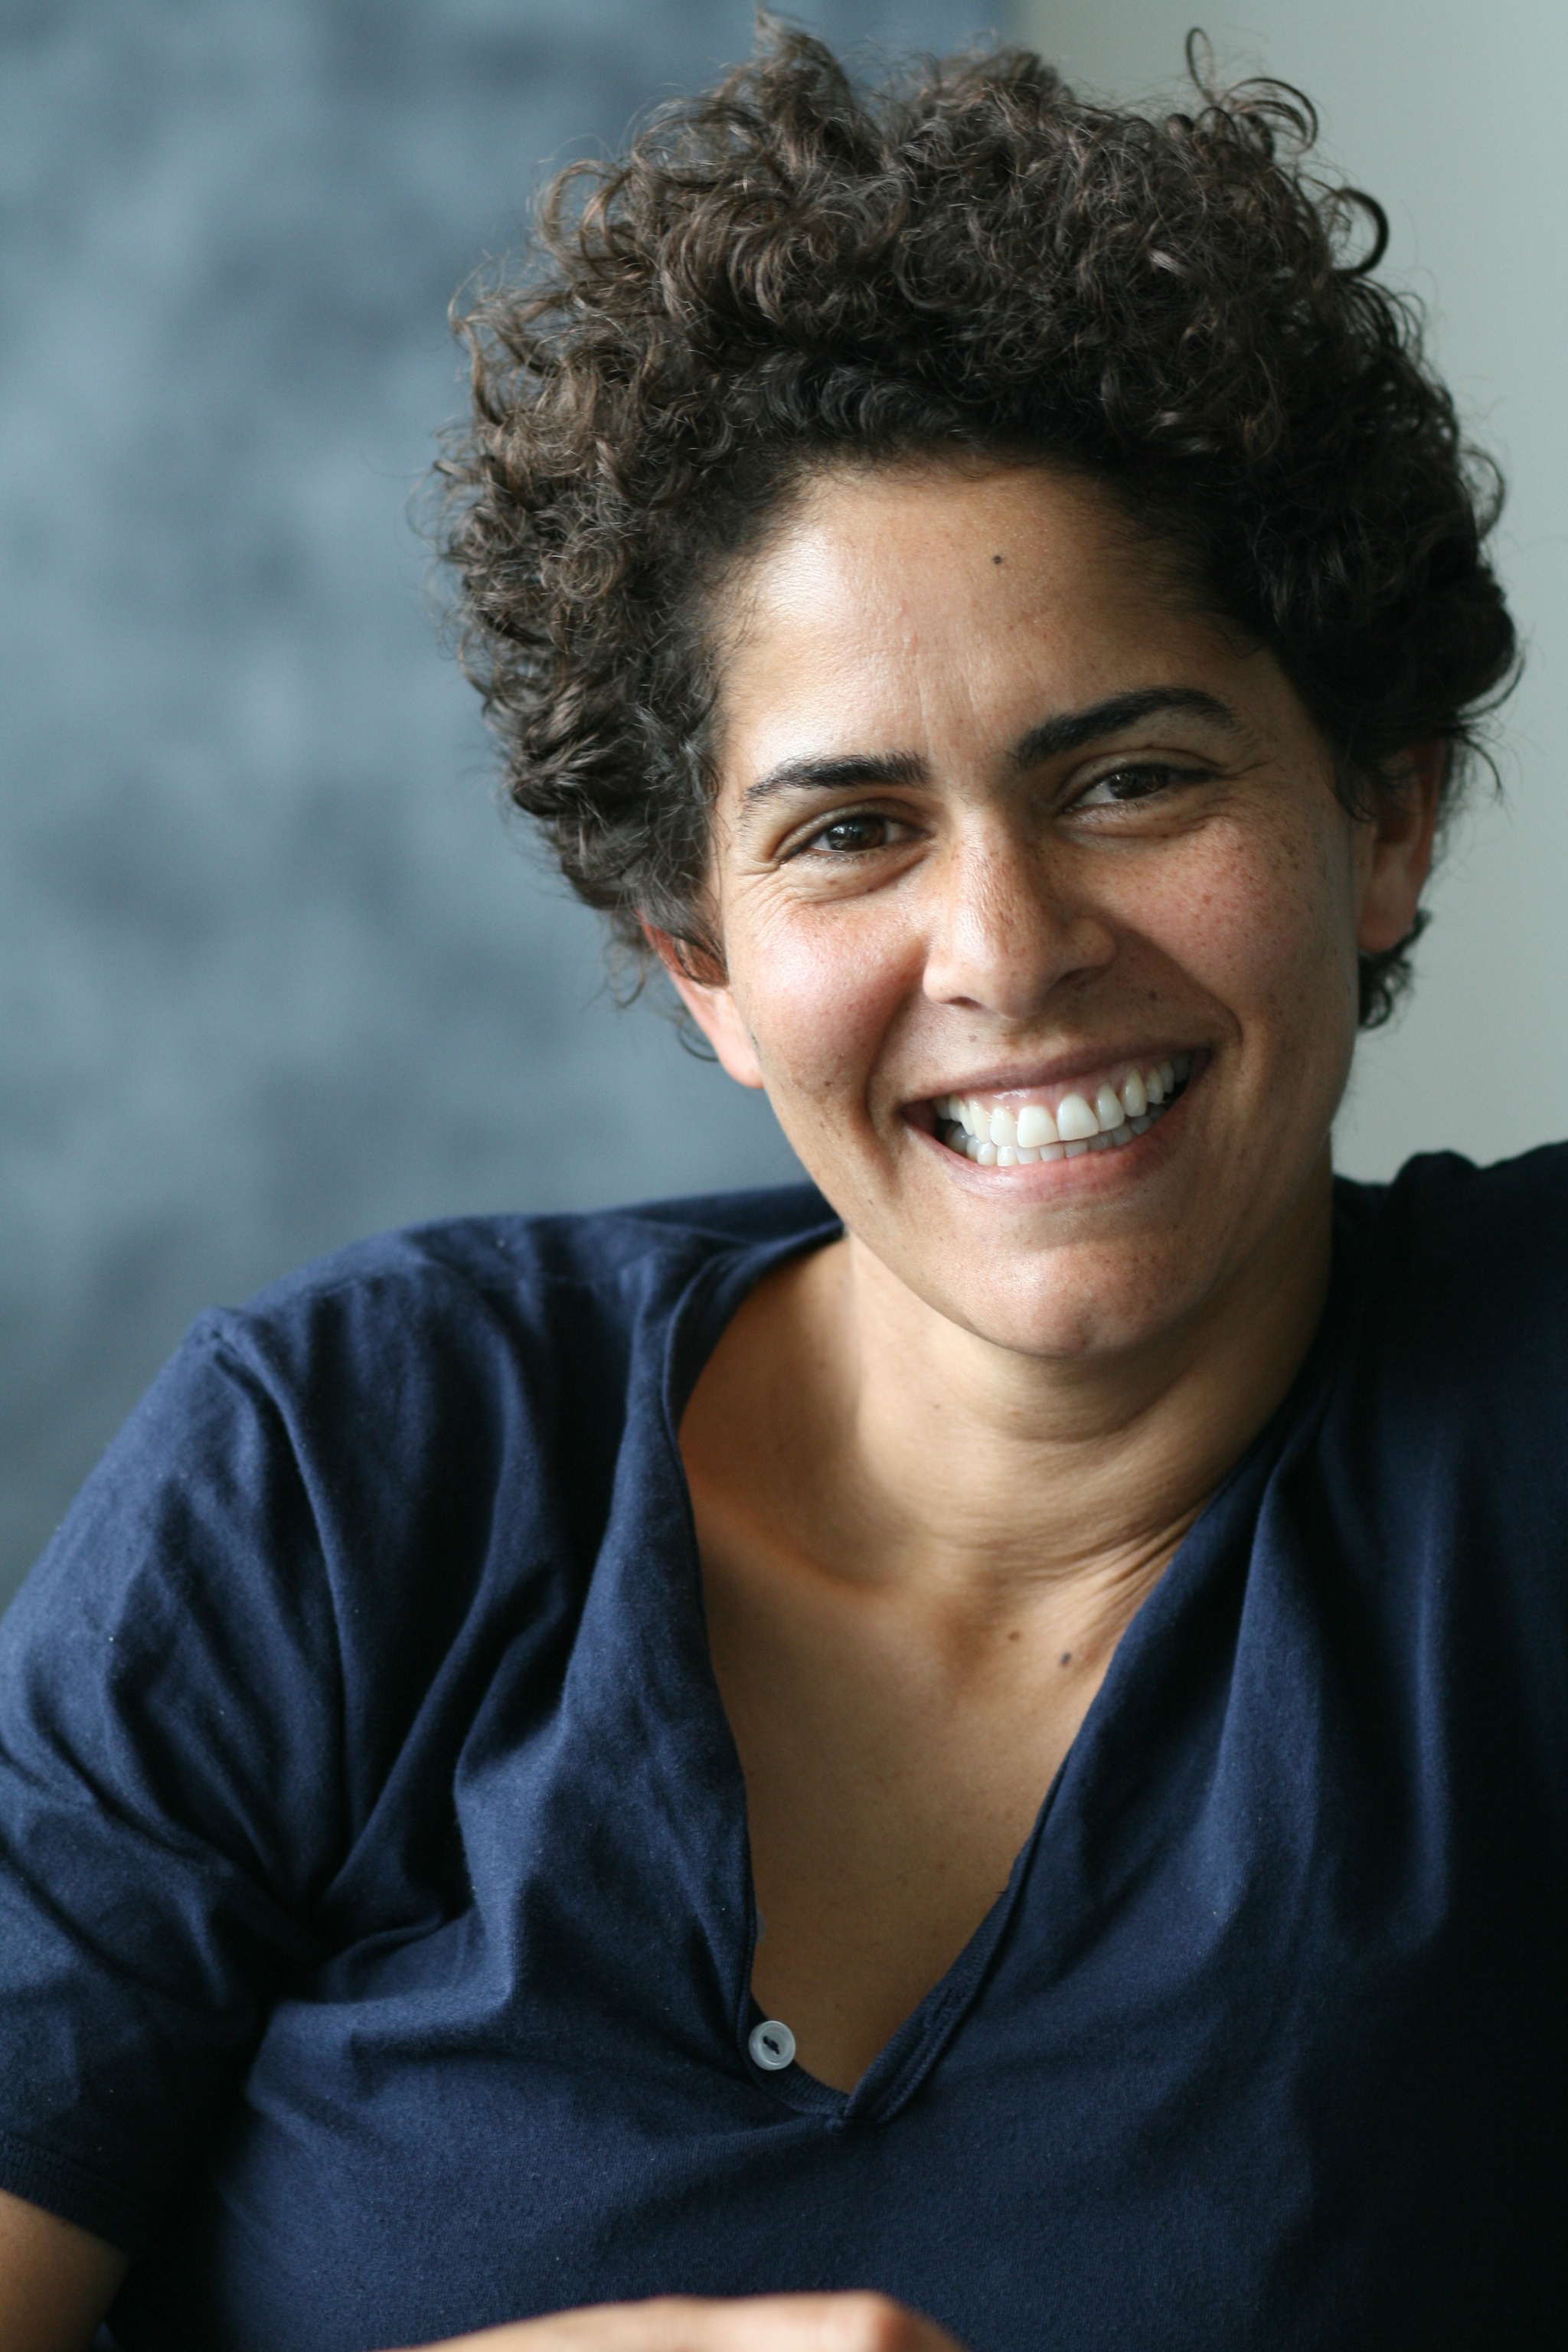 A photo of the artist Julie Mehretu smiling against a blurry gray and white background. Mehretu wears a blue shirt and light falls on the right side of her face.